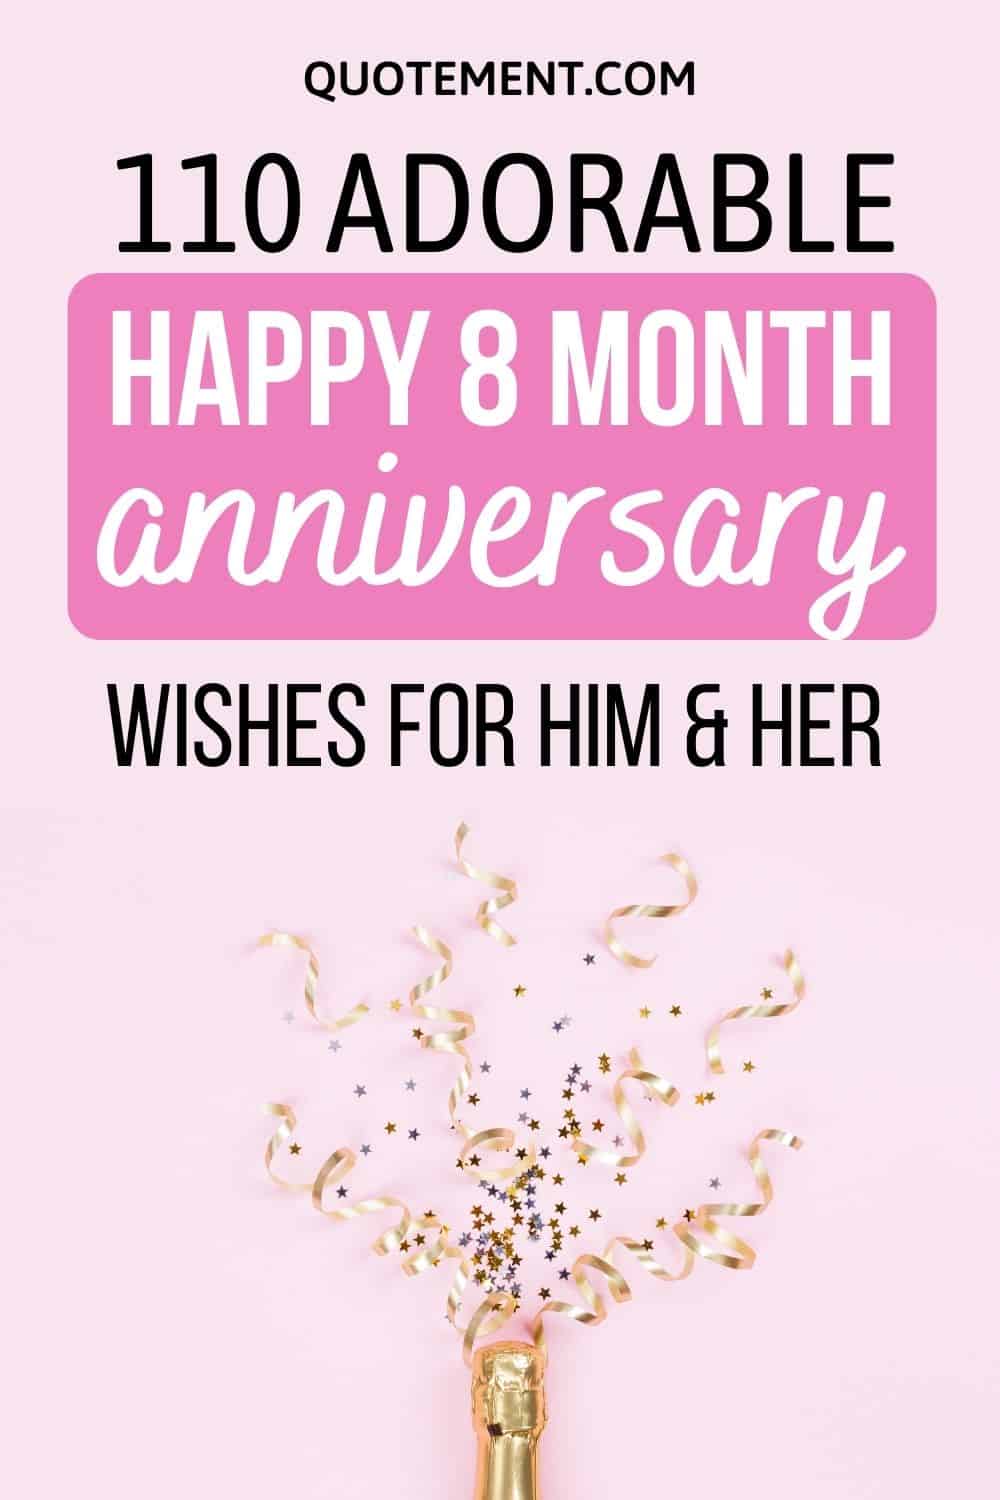 110 Adorable Happy 8 Month Anniversary Wishes For Him & Her pinterest